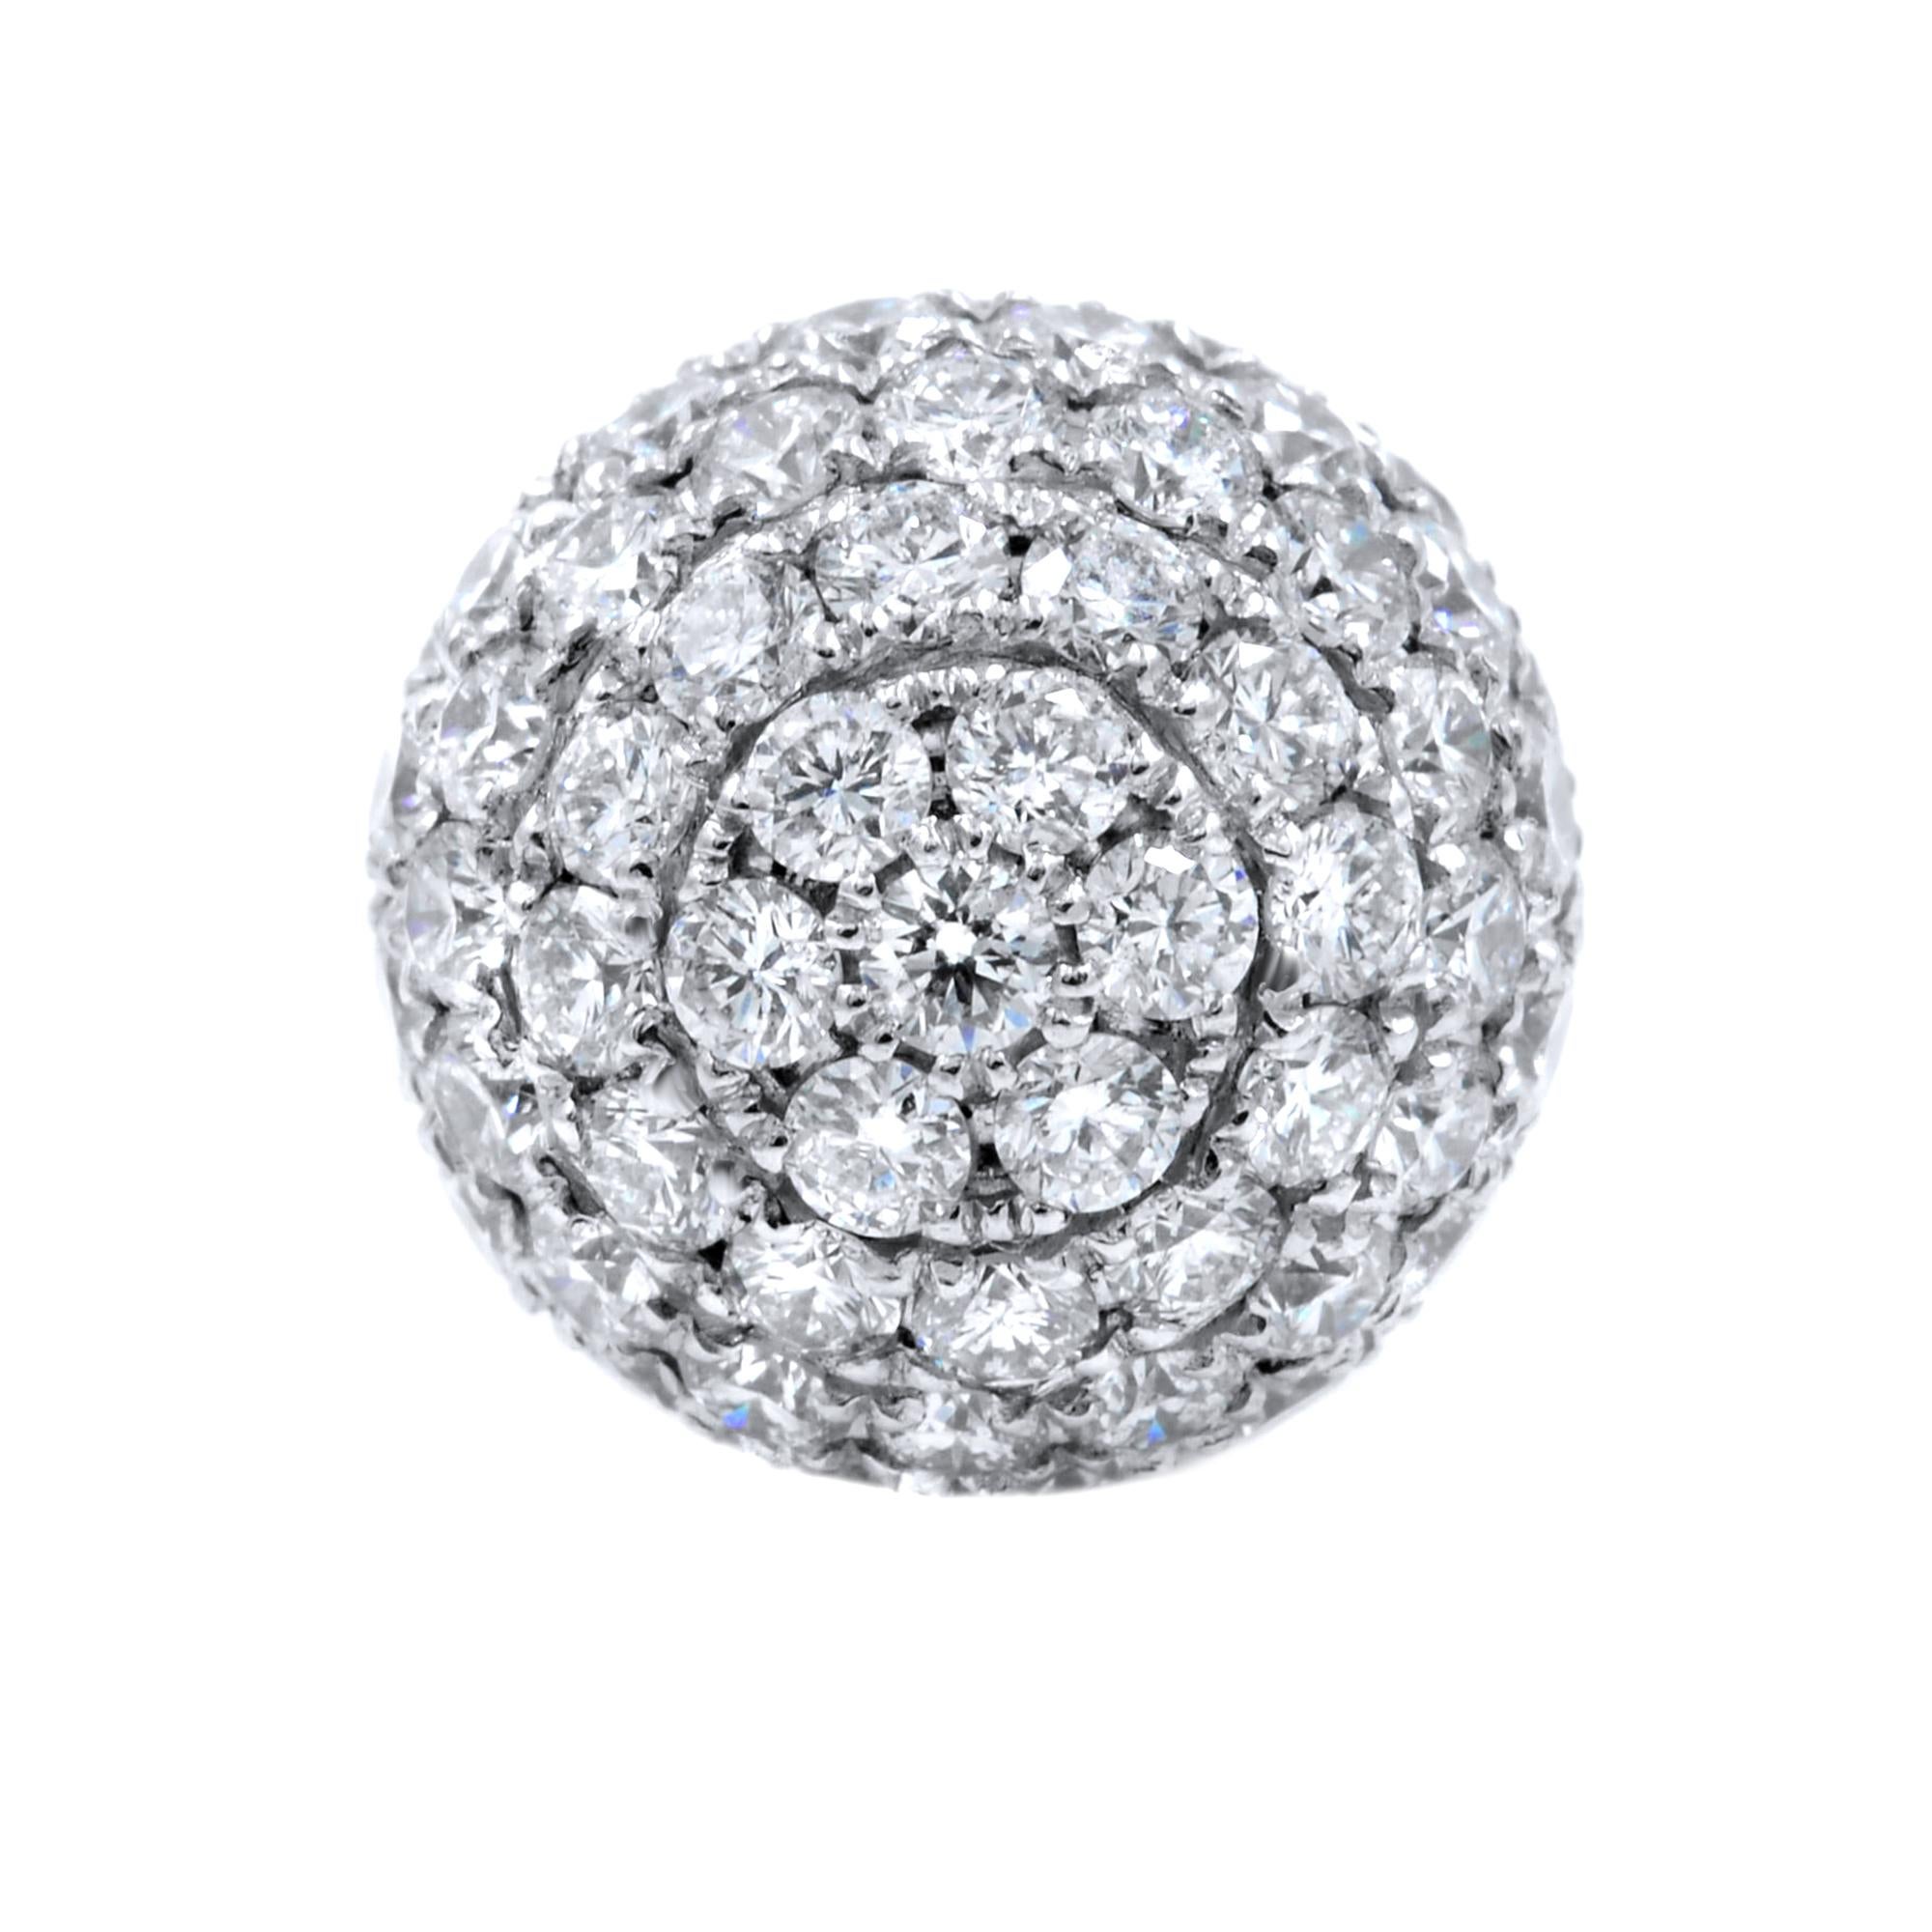 Breathtaking diamond pave radiant solid-gold spheres that top a pair of memorable yet versatile stud earrings.
Post back.
Handcrafted.
Total diamond weight: 5.62ct.
Color: G-H.
Clarity: VS2-SI1.
18K white gold 6.31gm
